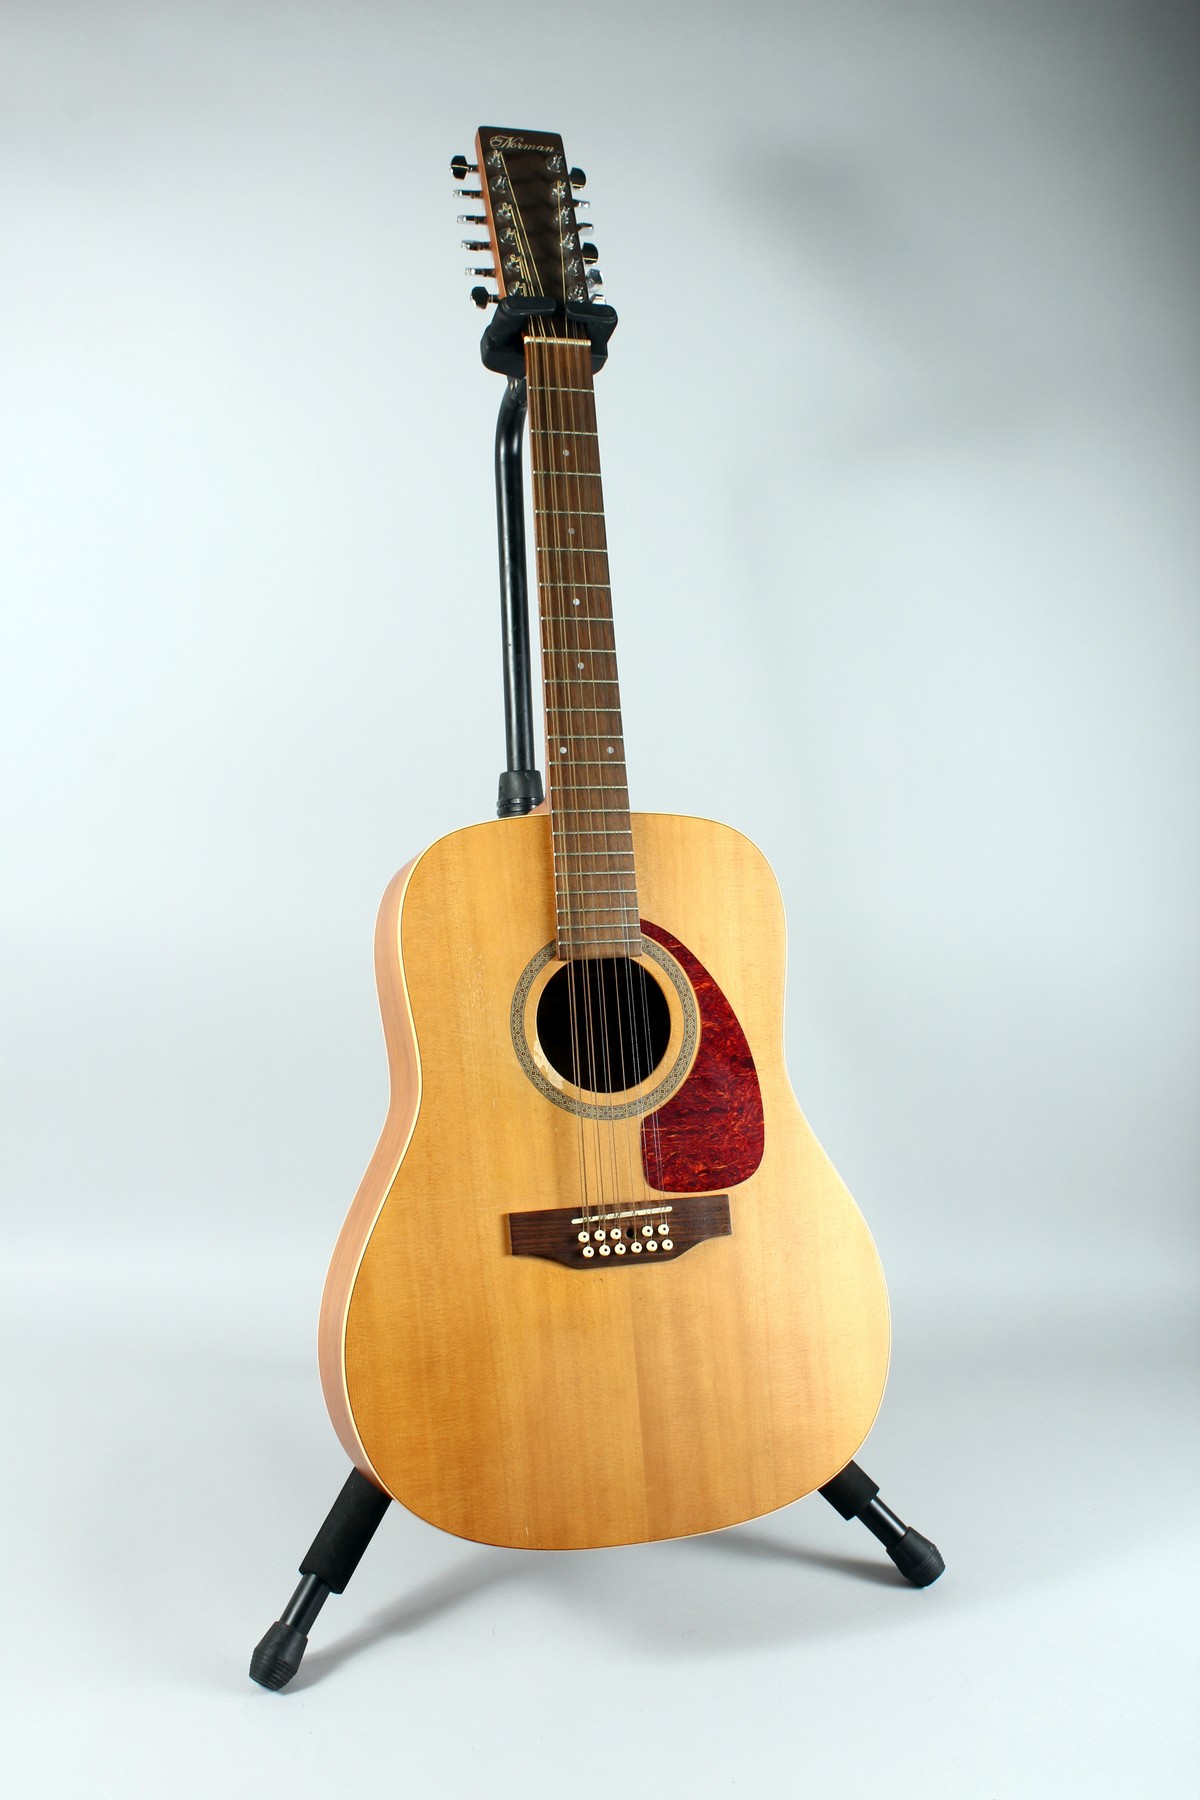 NORMAN B20 - a 12-string acoustic dreadnought guitar handmade in Quebec, Canada. Cherry back and